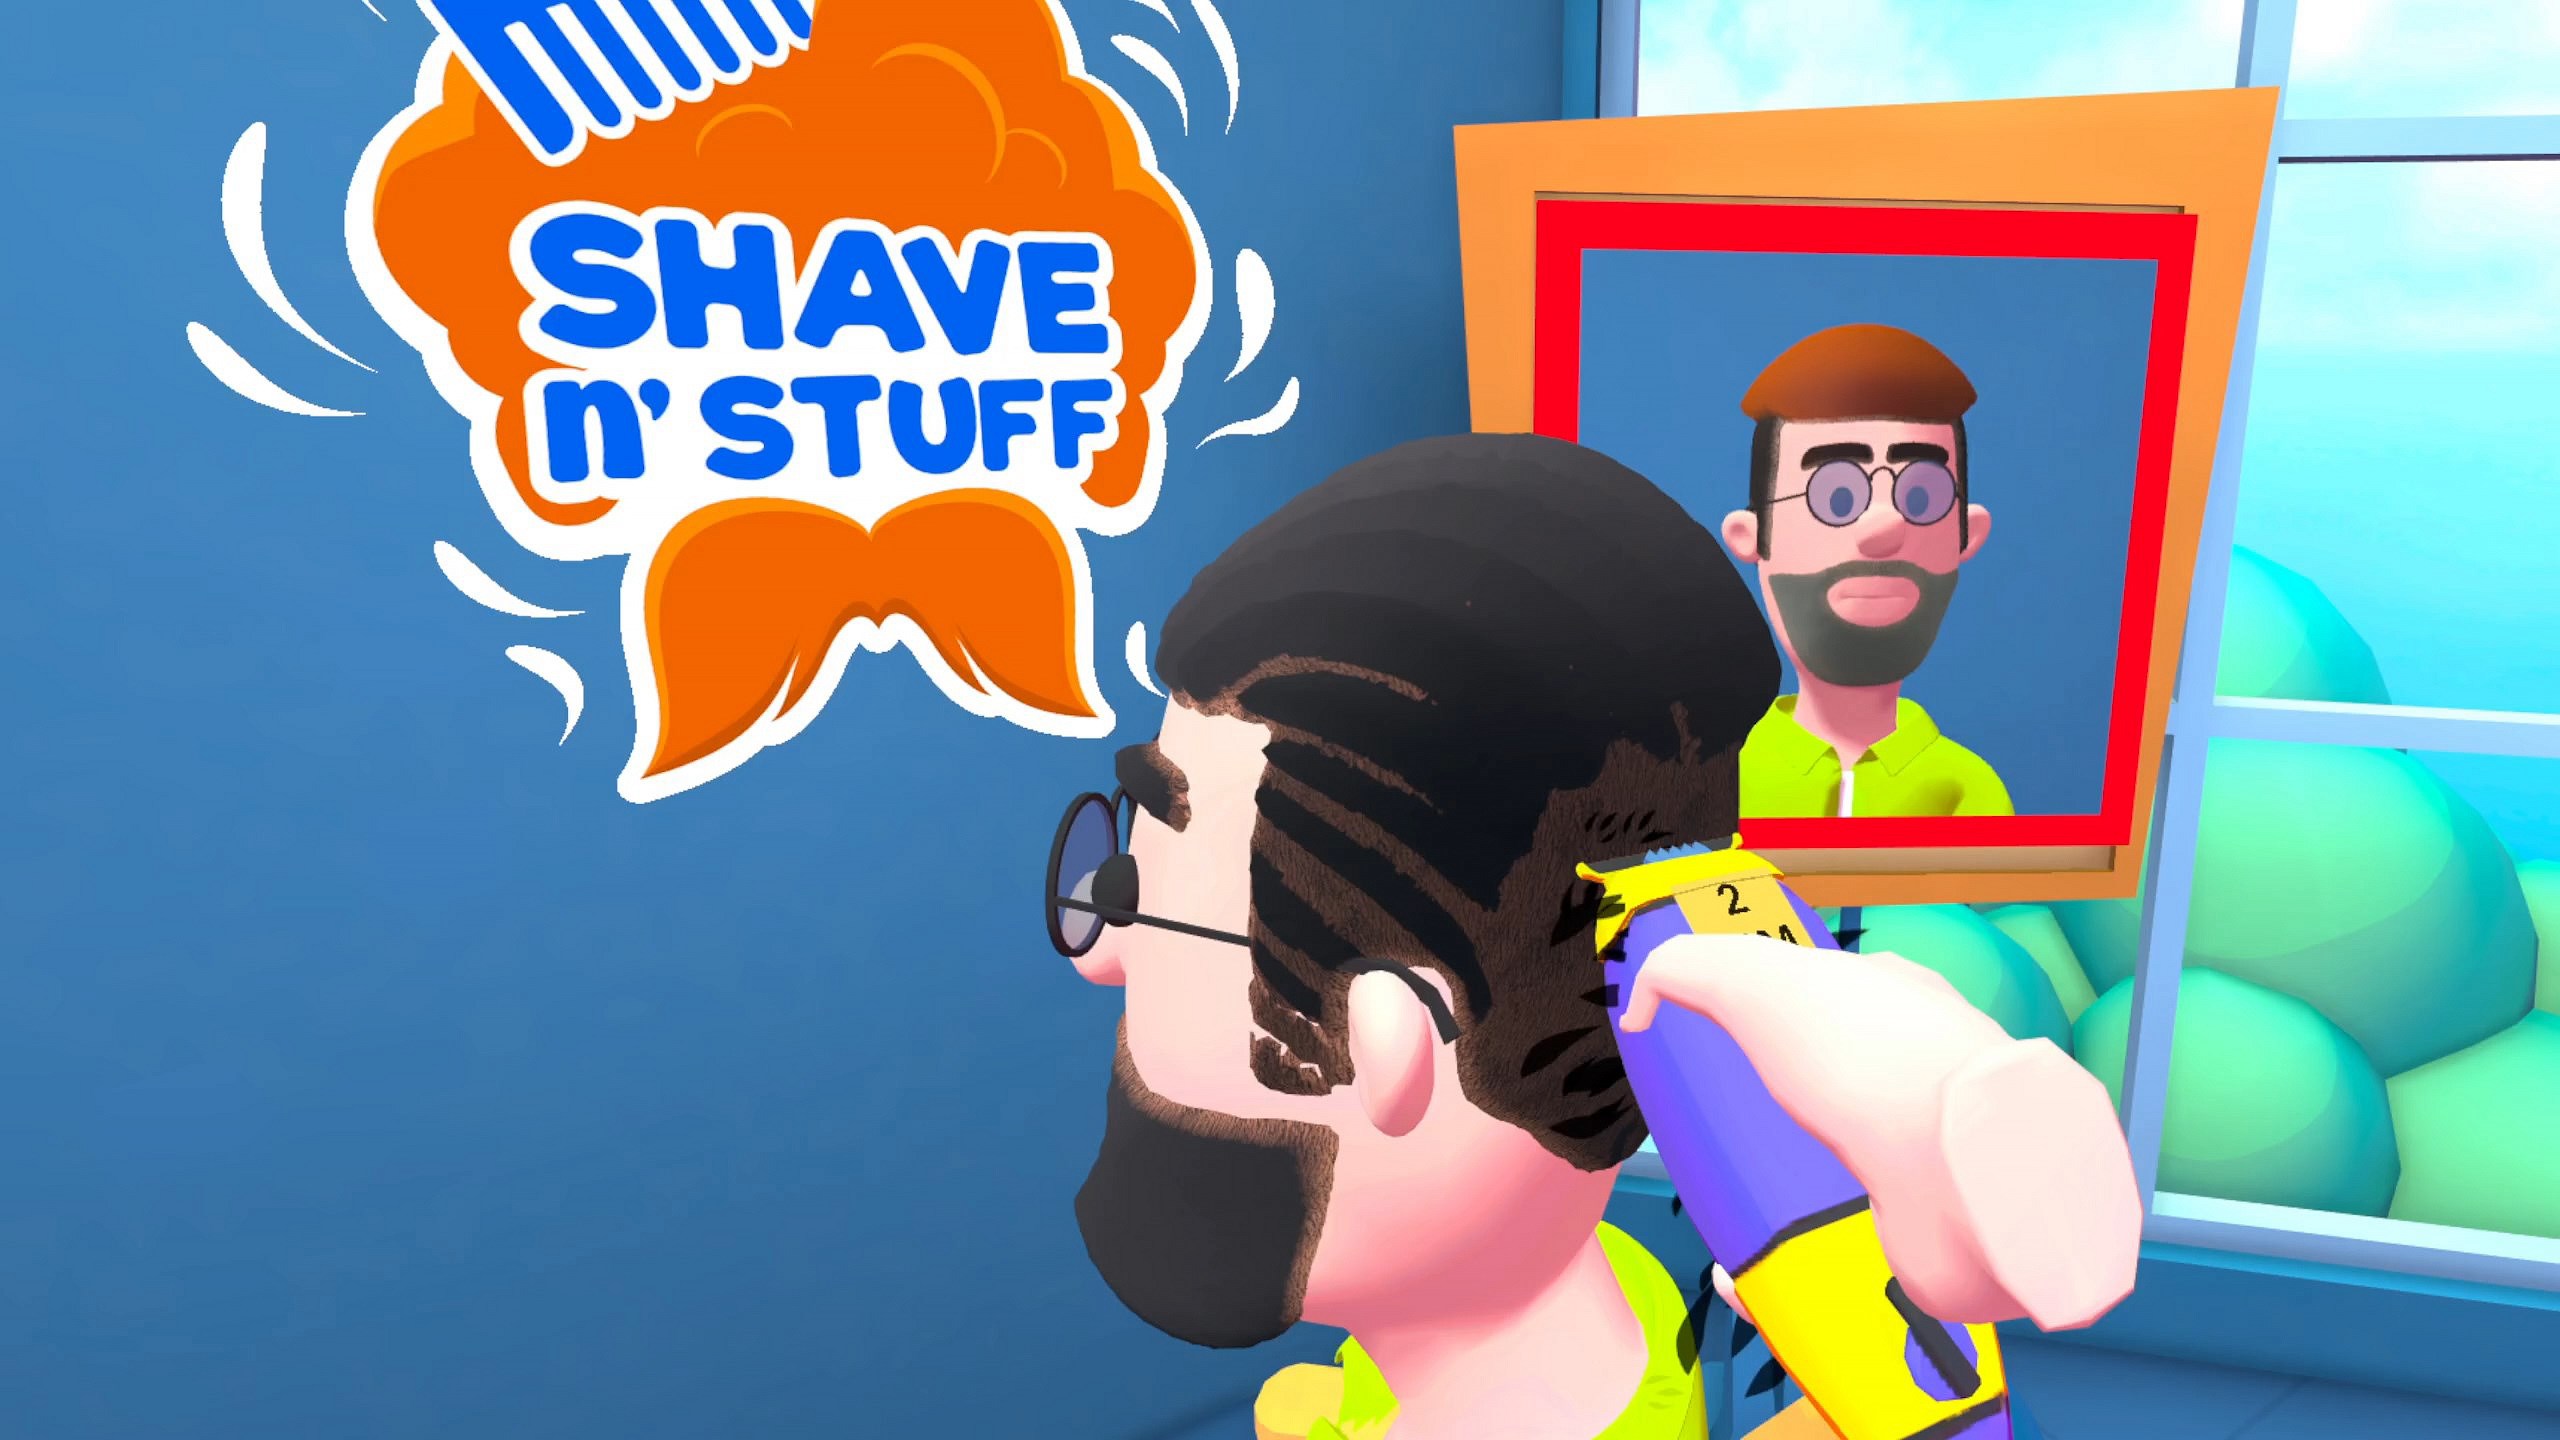 Oculus Quest 游戏《理发师》Shave and Stuff